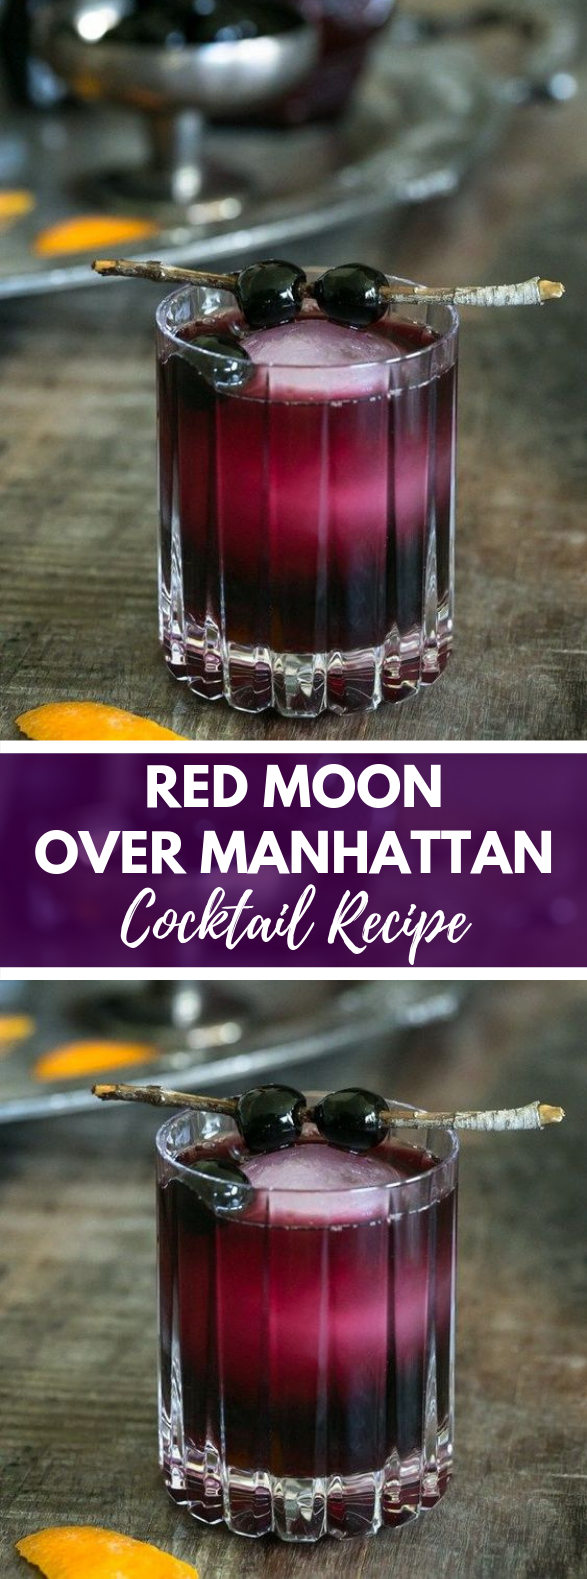 RED MOON OVER MANHATTAN COCKTAIL RECIPE #drinks #recipes